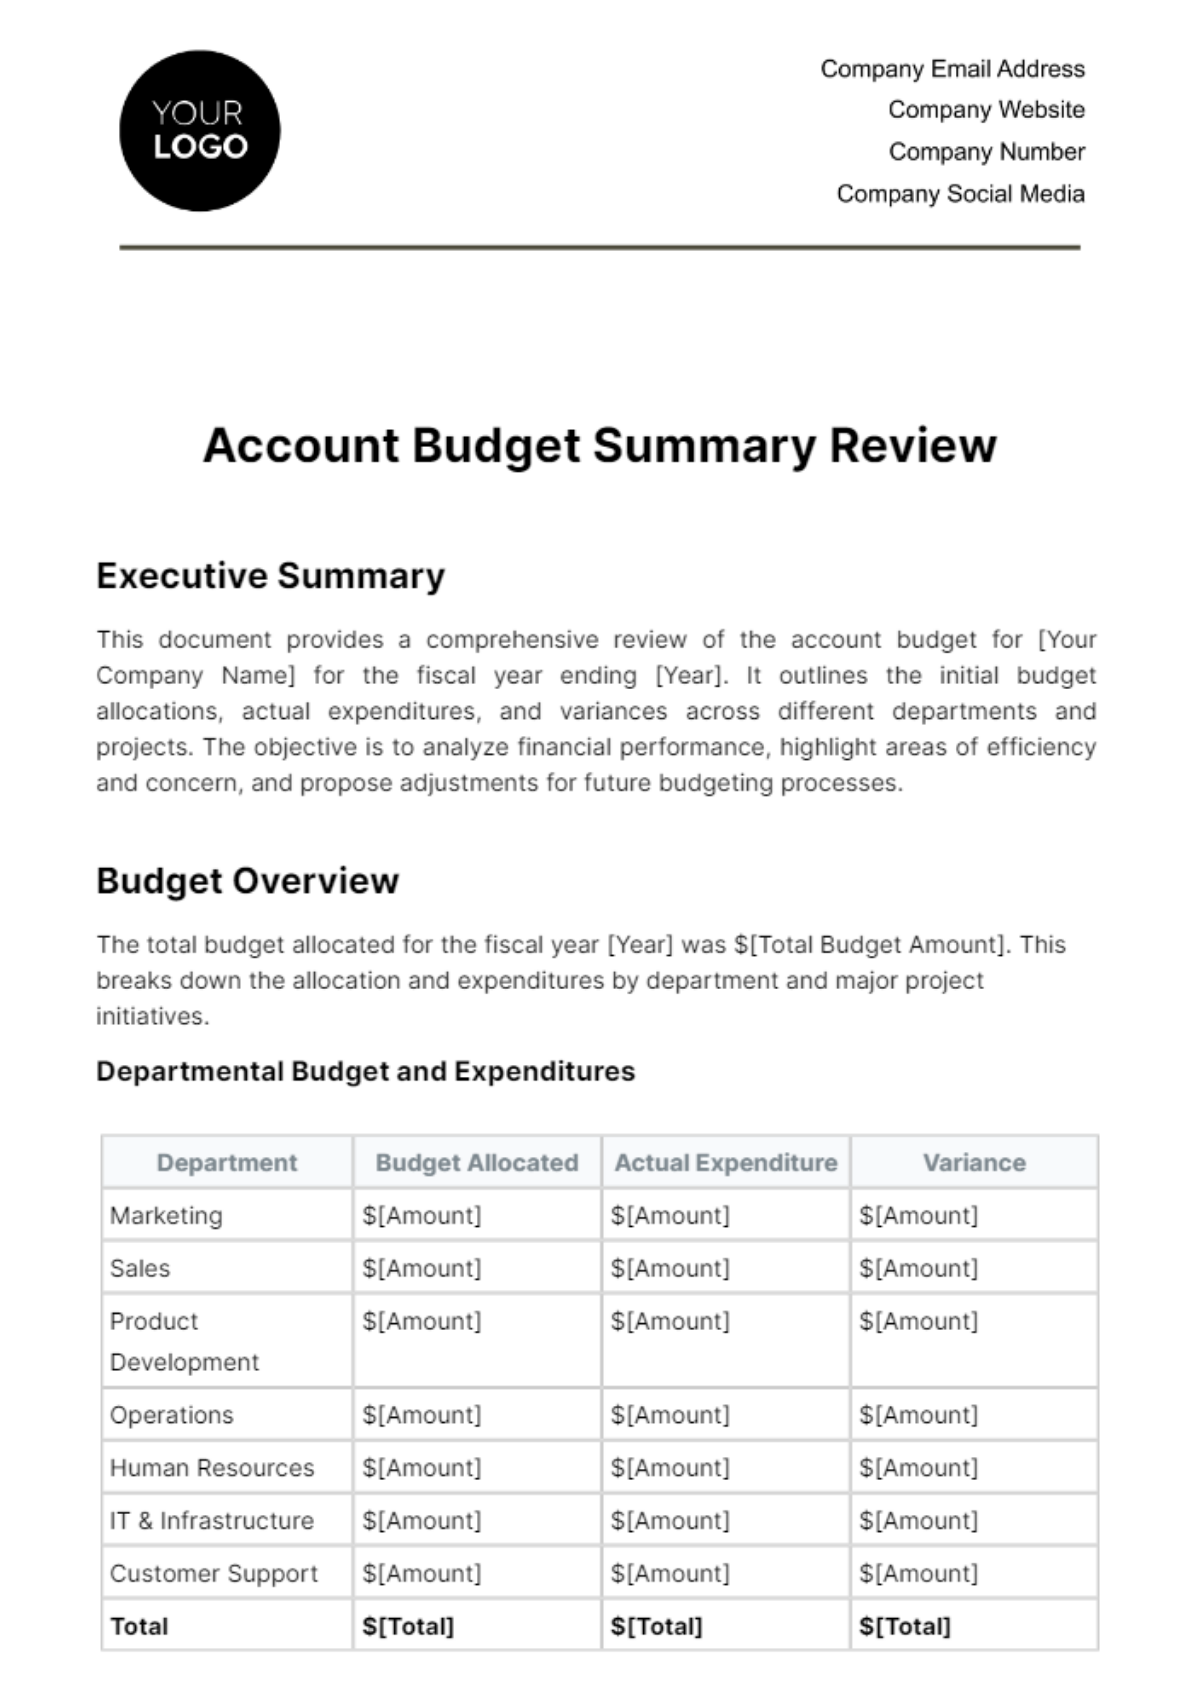 Account Budget Summary Review Template